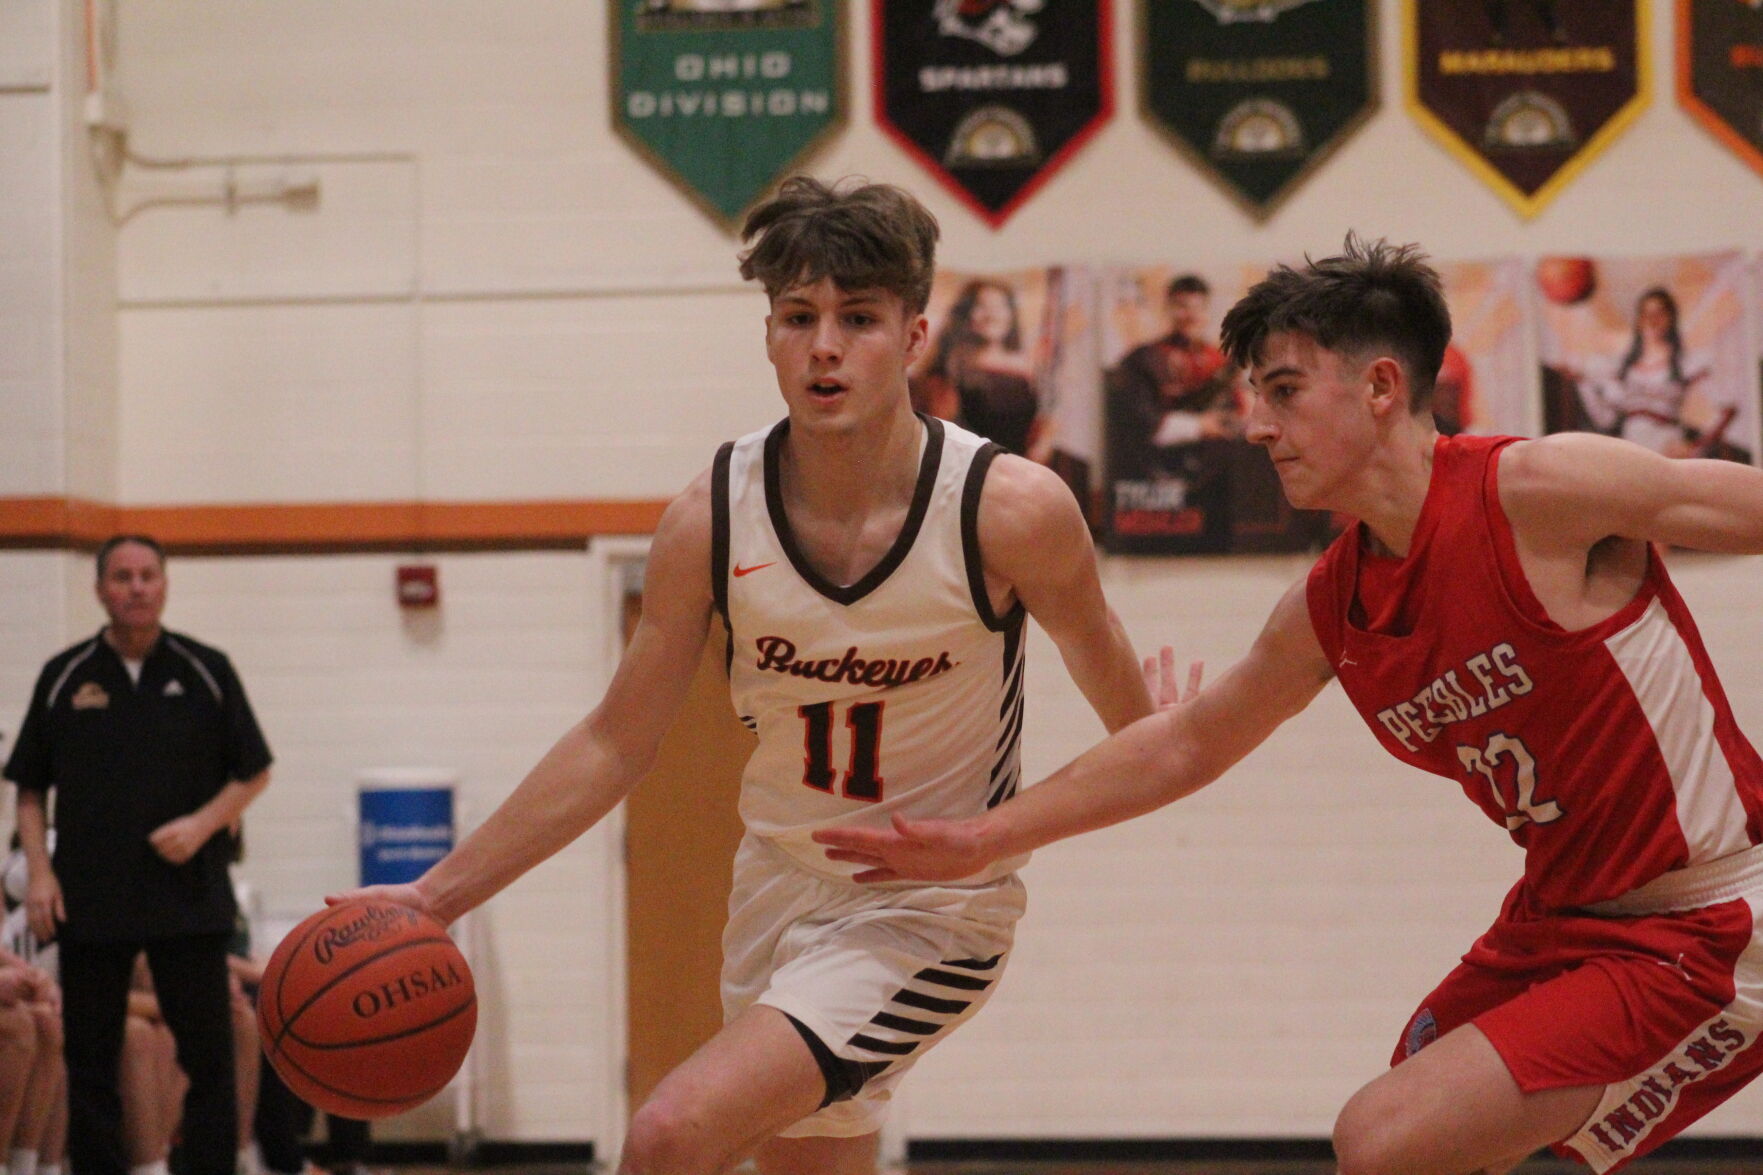 Nelsonville-York’s Defense Leads Them to Success in Sectional Final and Crucial Win